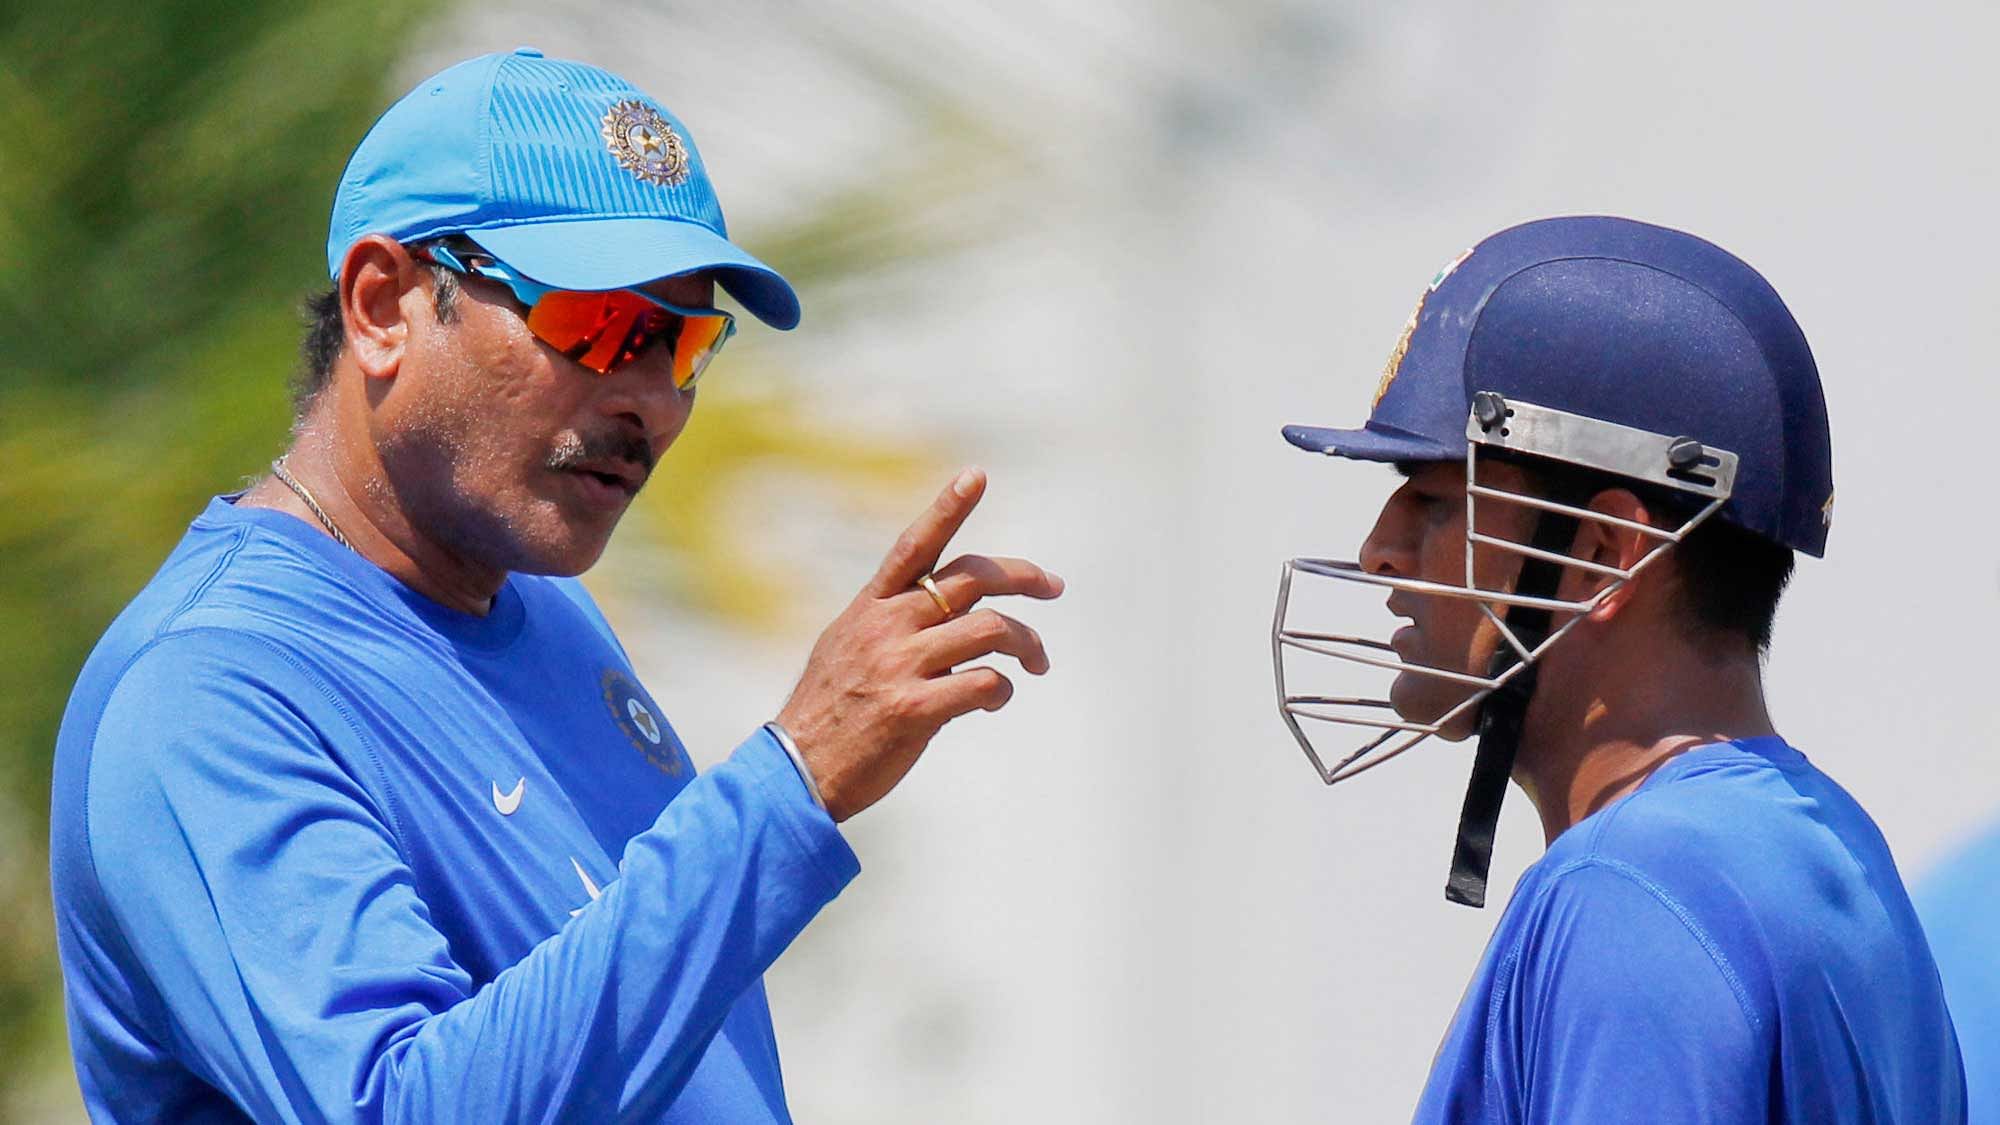  Ravi Shastri allegedly abused the Wankhede Stadium curator Sudhir Naik after India were thrashed by South Africa in the 5th ODI. (Photo: PTI)